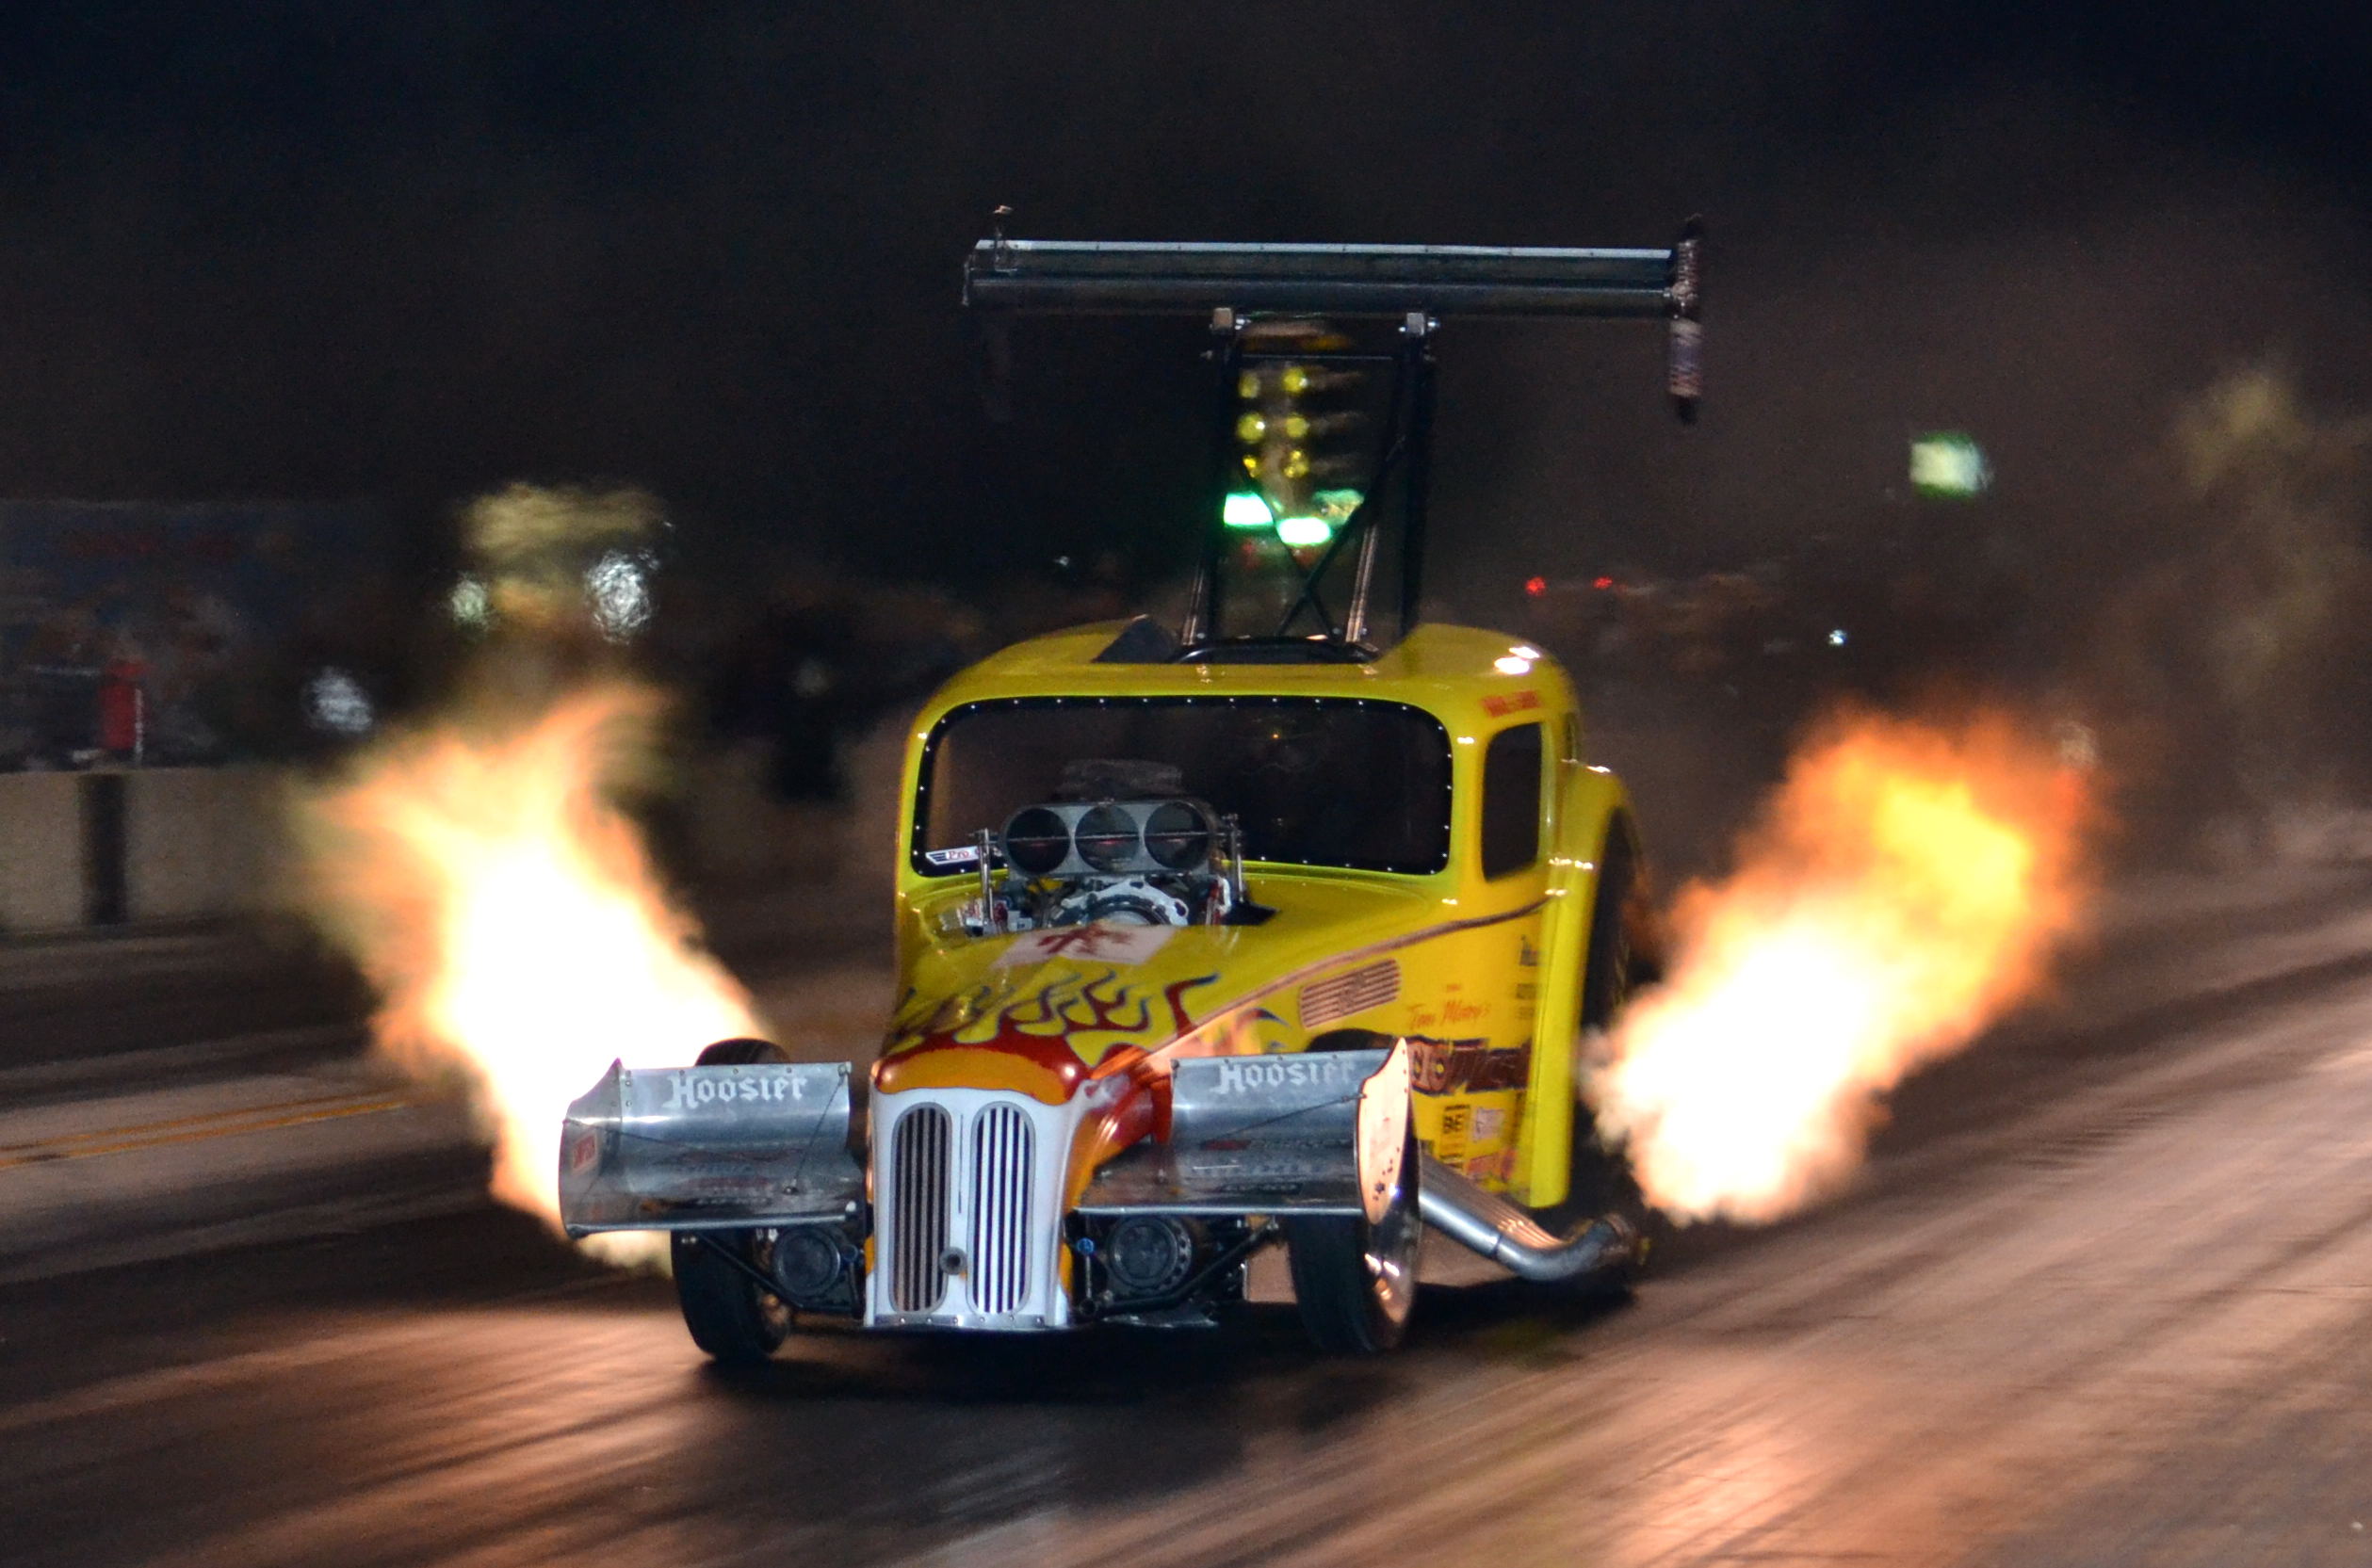 NOSTALGIA FUNNY CARS FIRE UP THE 'NIGHT OF THUNDER' – US131 Motorsports Park